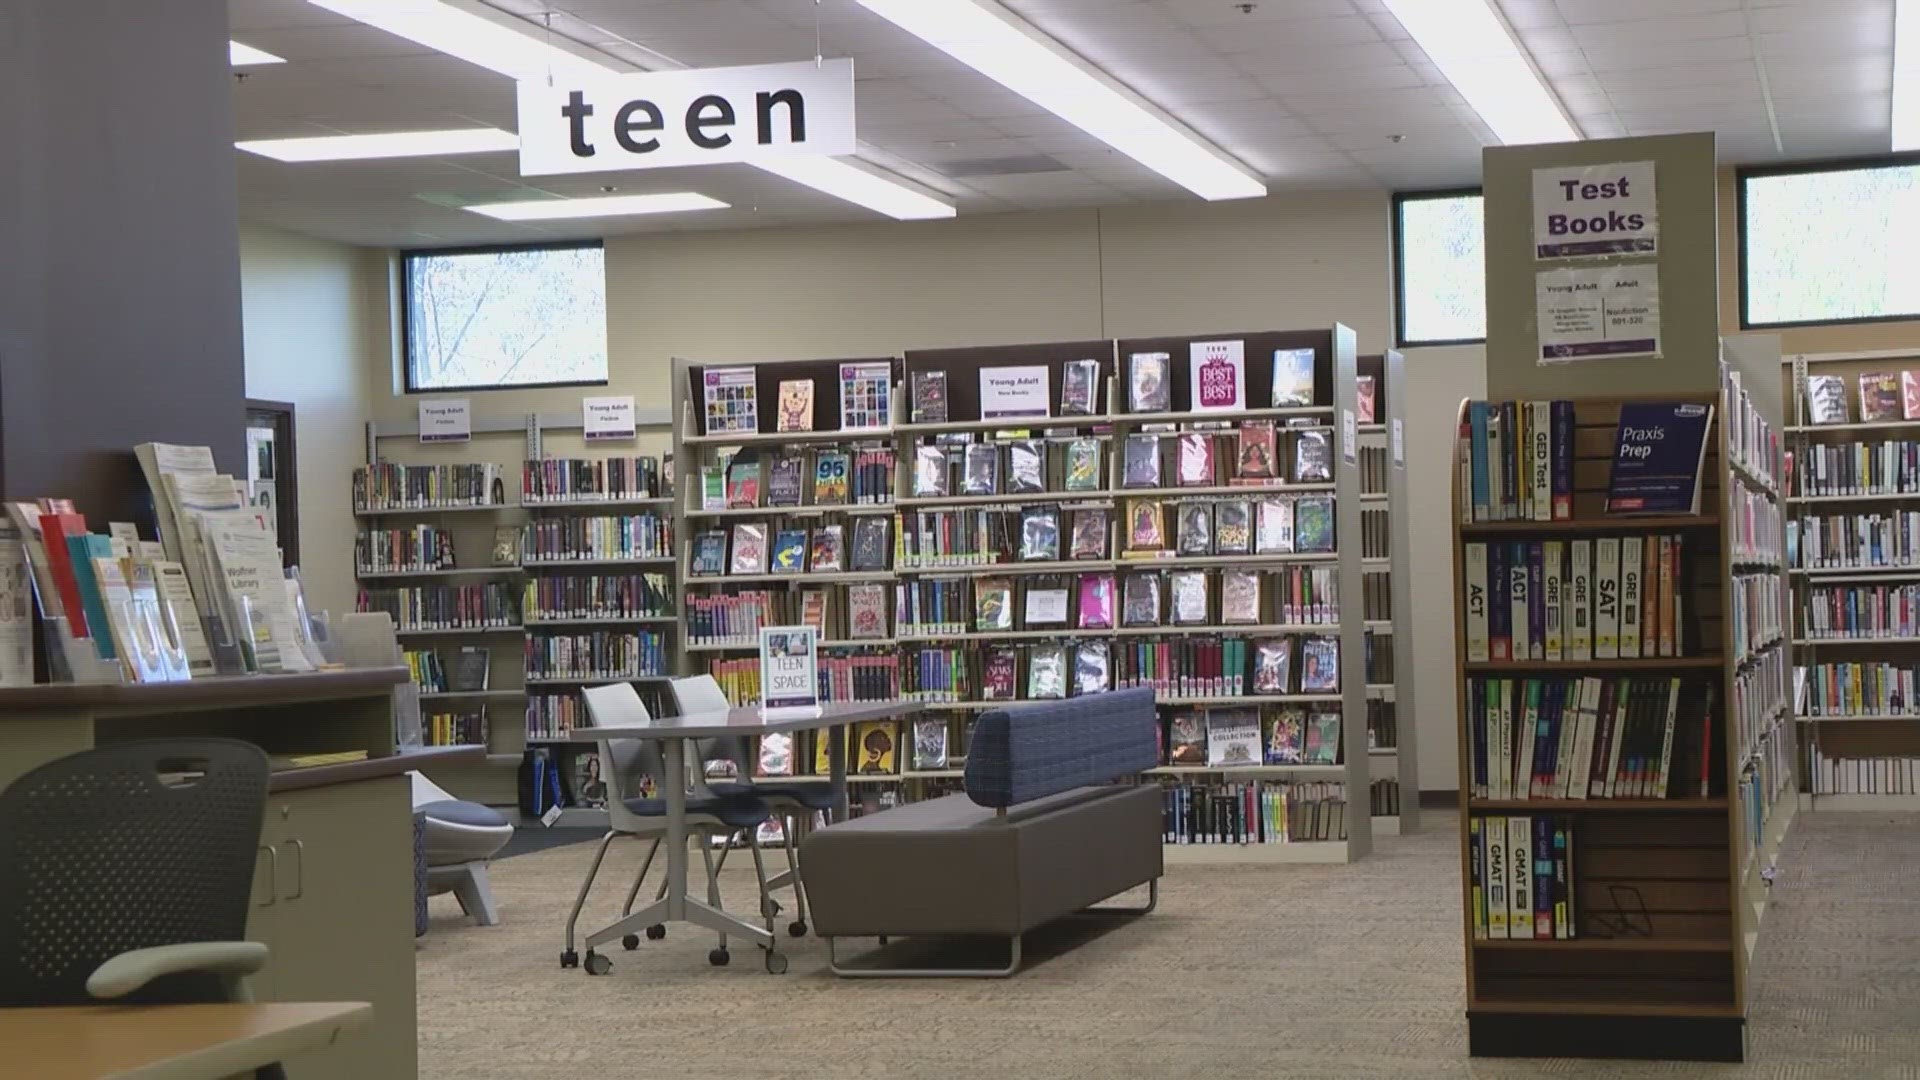 In many cases, books in Maine schools have been challenged because members of the community say they're worried about violence or sexually explicit material.